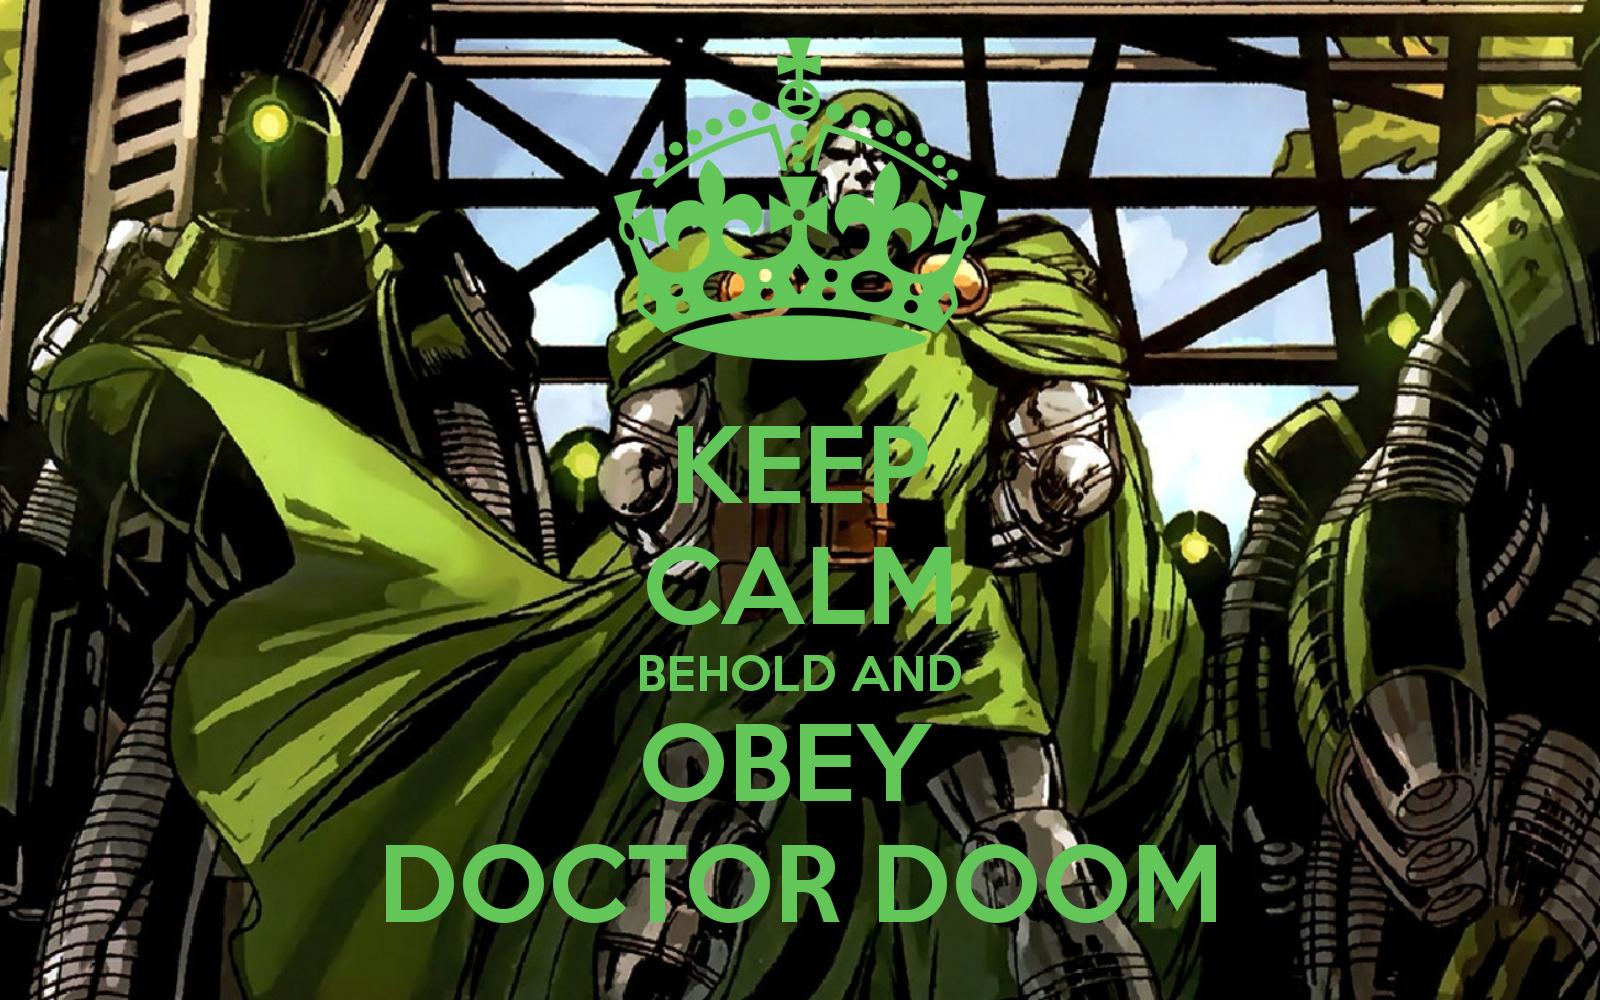 KEEP CALM BEHOLD AND OBEY DOCTOR DOOM CALM AND CARRY ON